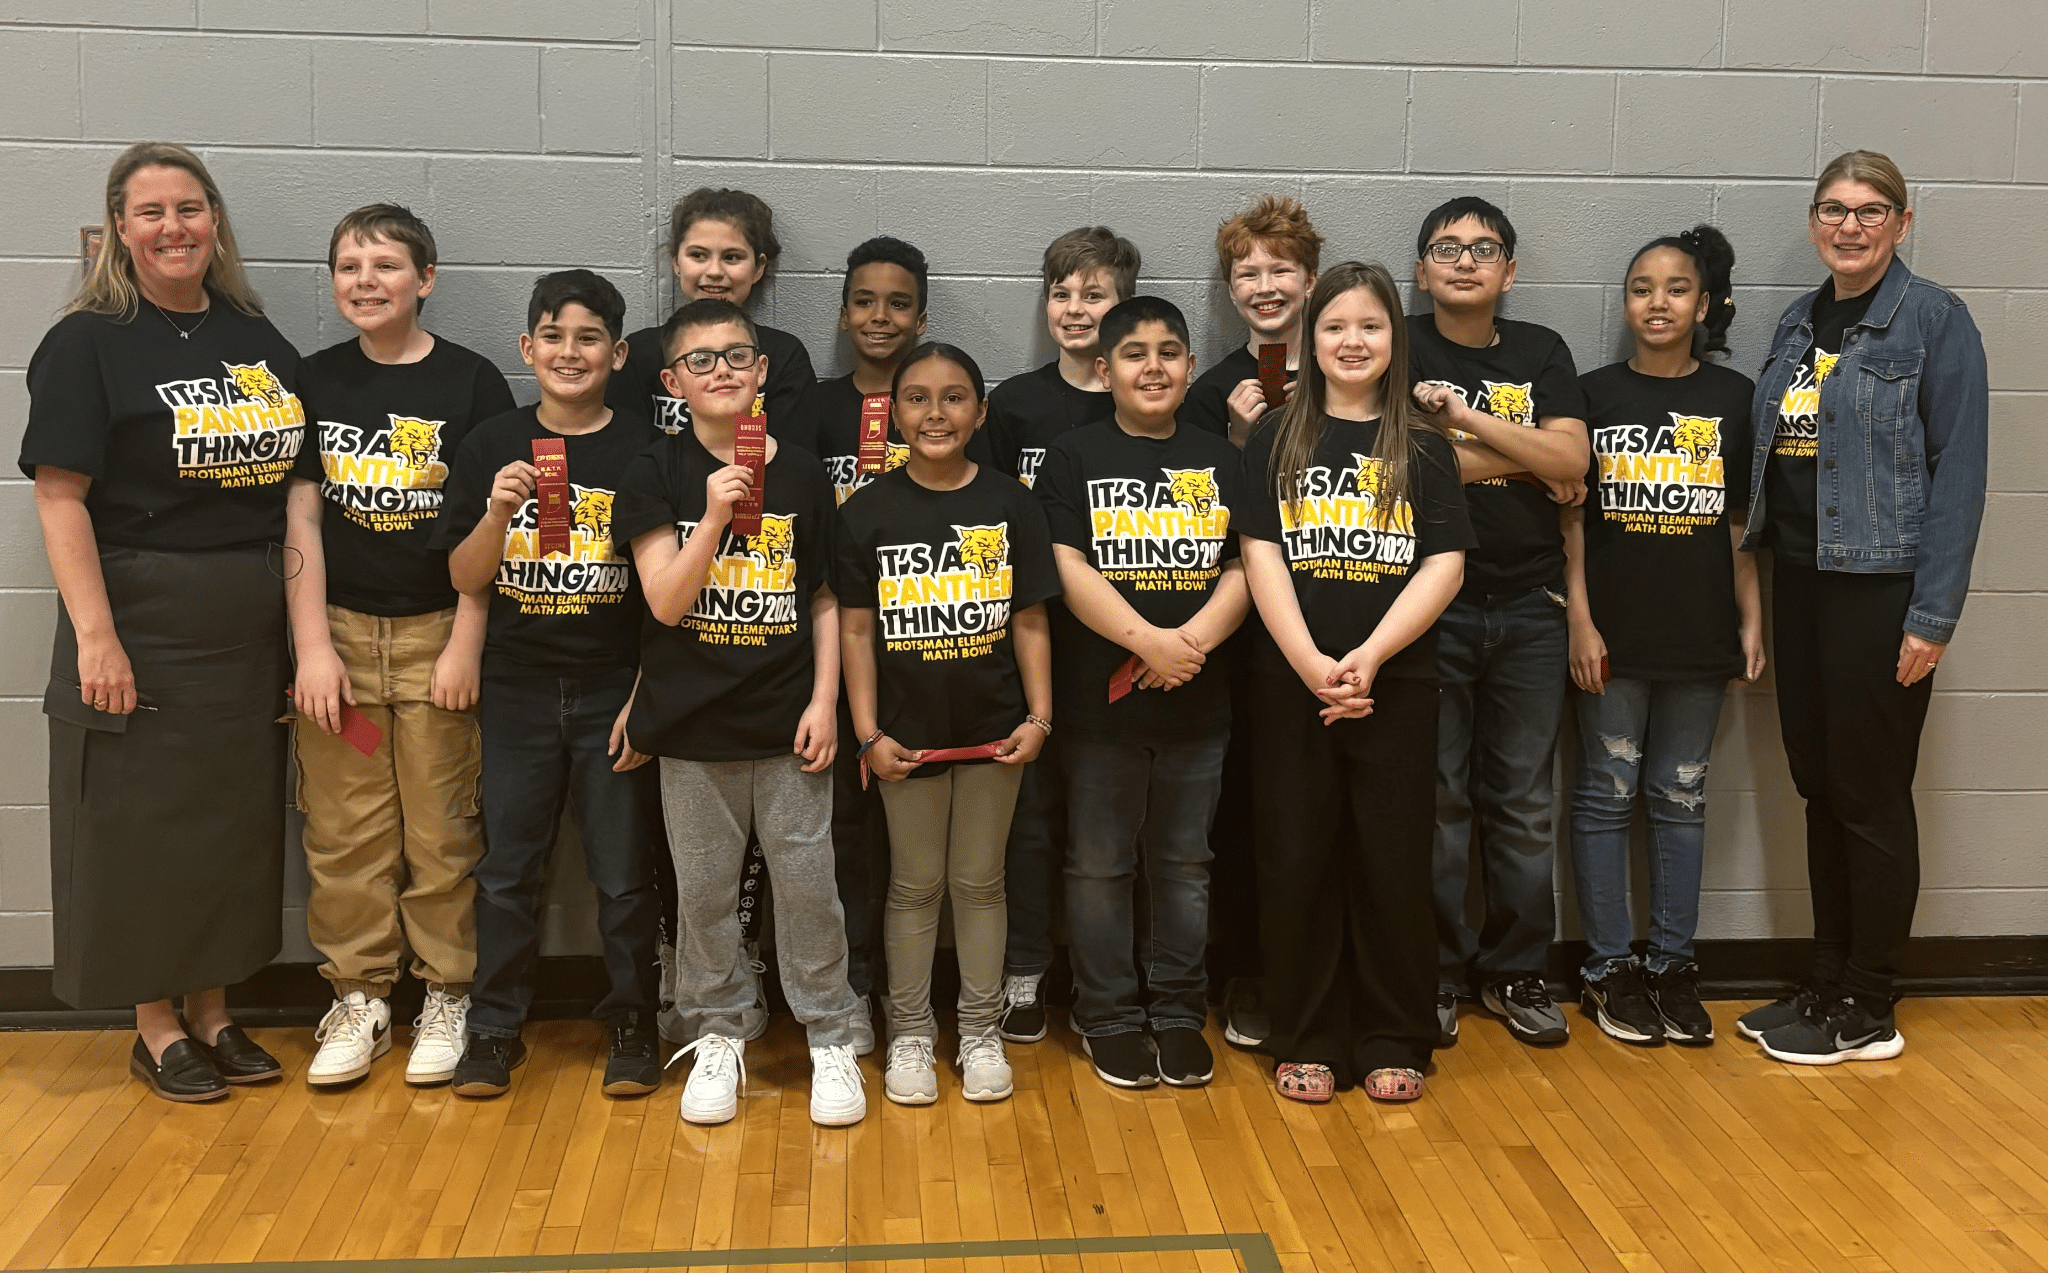 Congratulations to our Math Bowl team. They competed and placed 2nd in the regional competition and 22nd in the state. A huge thank you to our coaches, Mrs. McGrath and Mrs. Triveline and to the team for all their hard work.